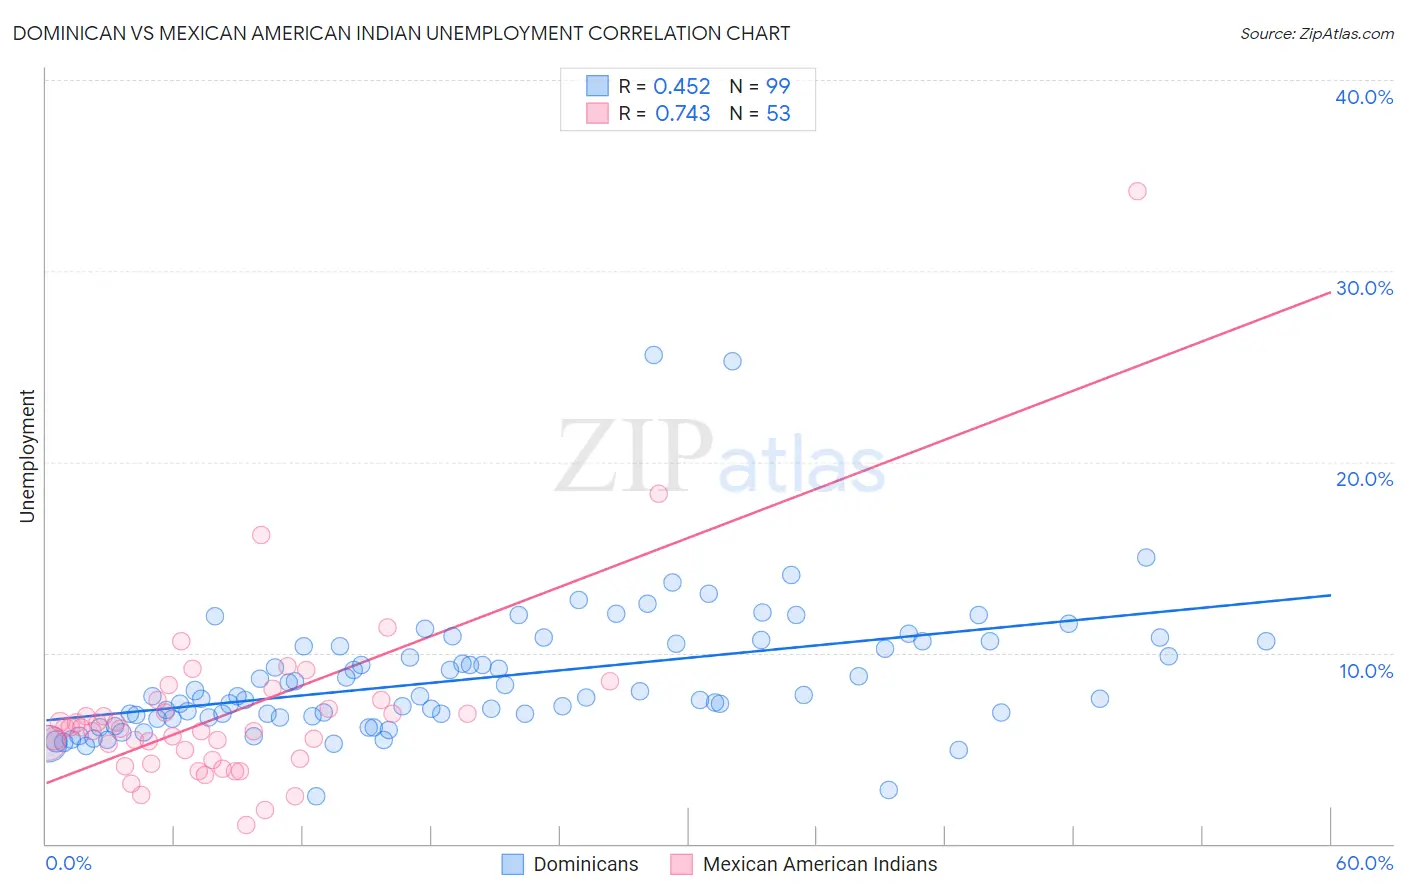 Dominican vs Mexican American Indian Unemployment